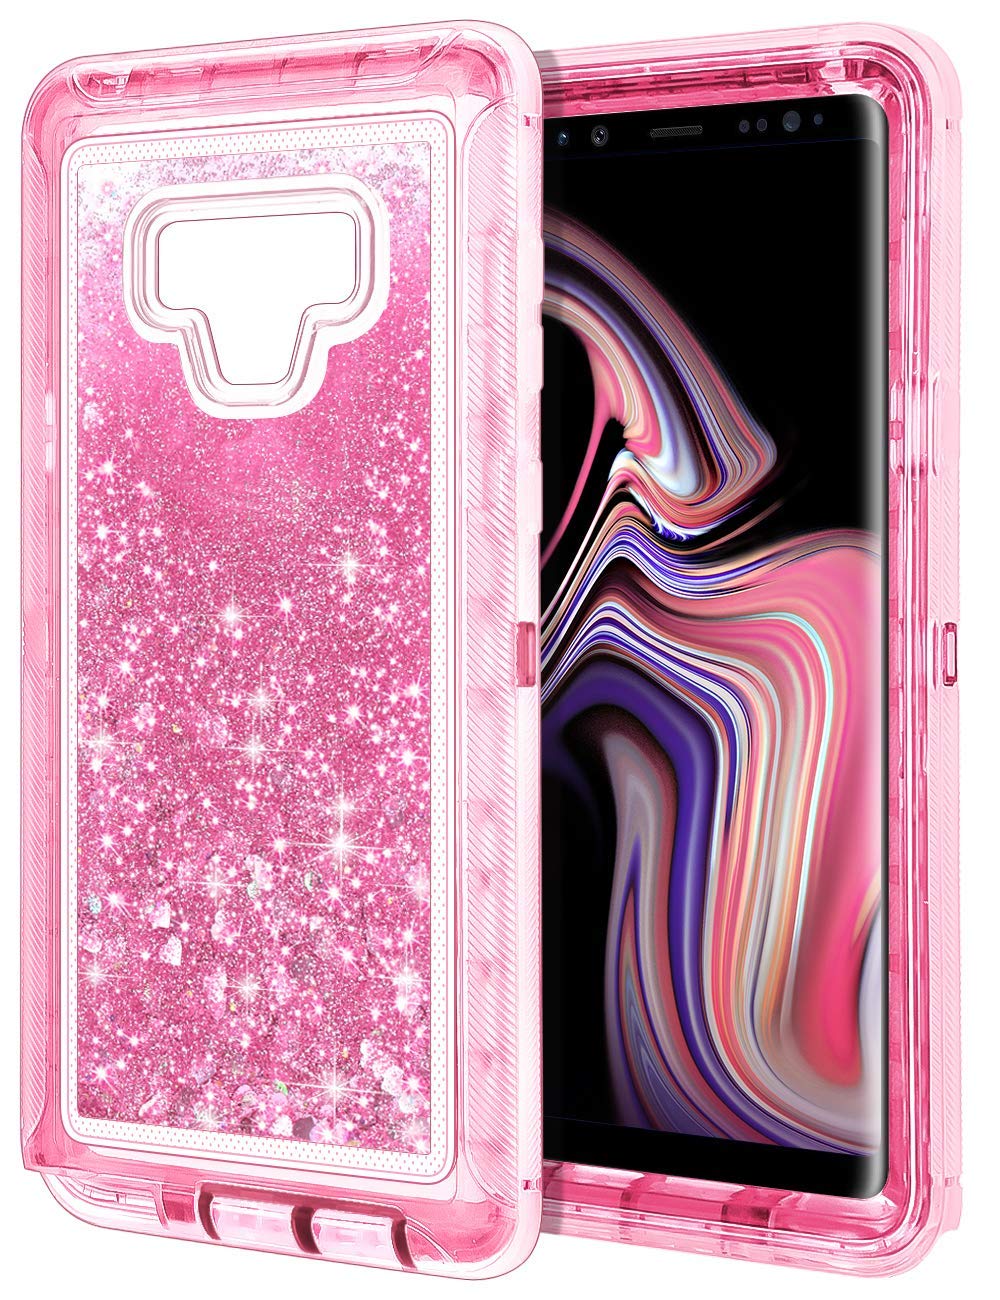 Galaxy Note 9 Star Dust Quick Stand Clear Armor Robot Case (Hot Pink)